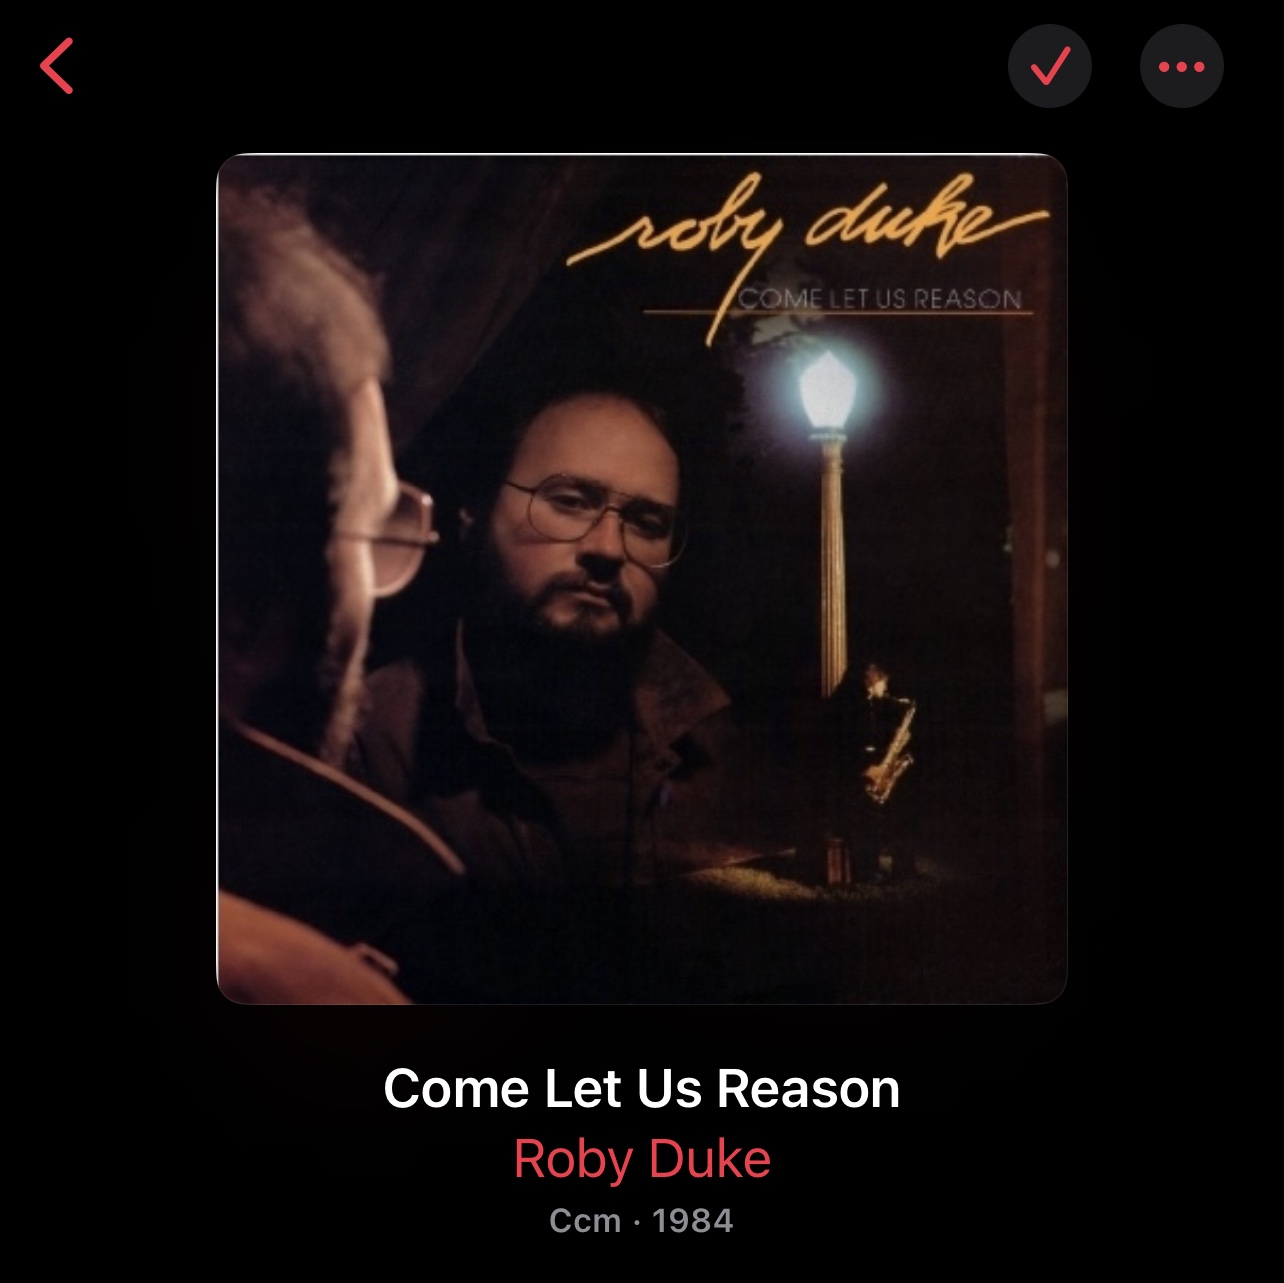 Roby Duke – “Come Let Us Reason”